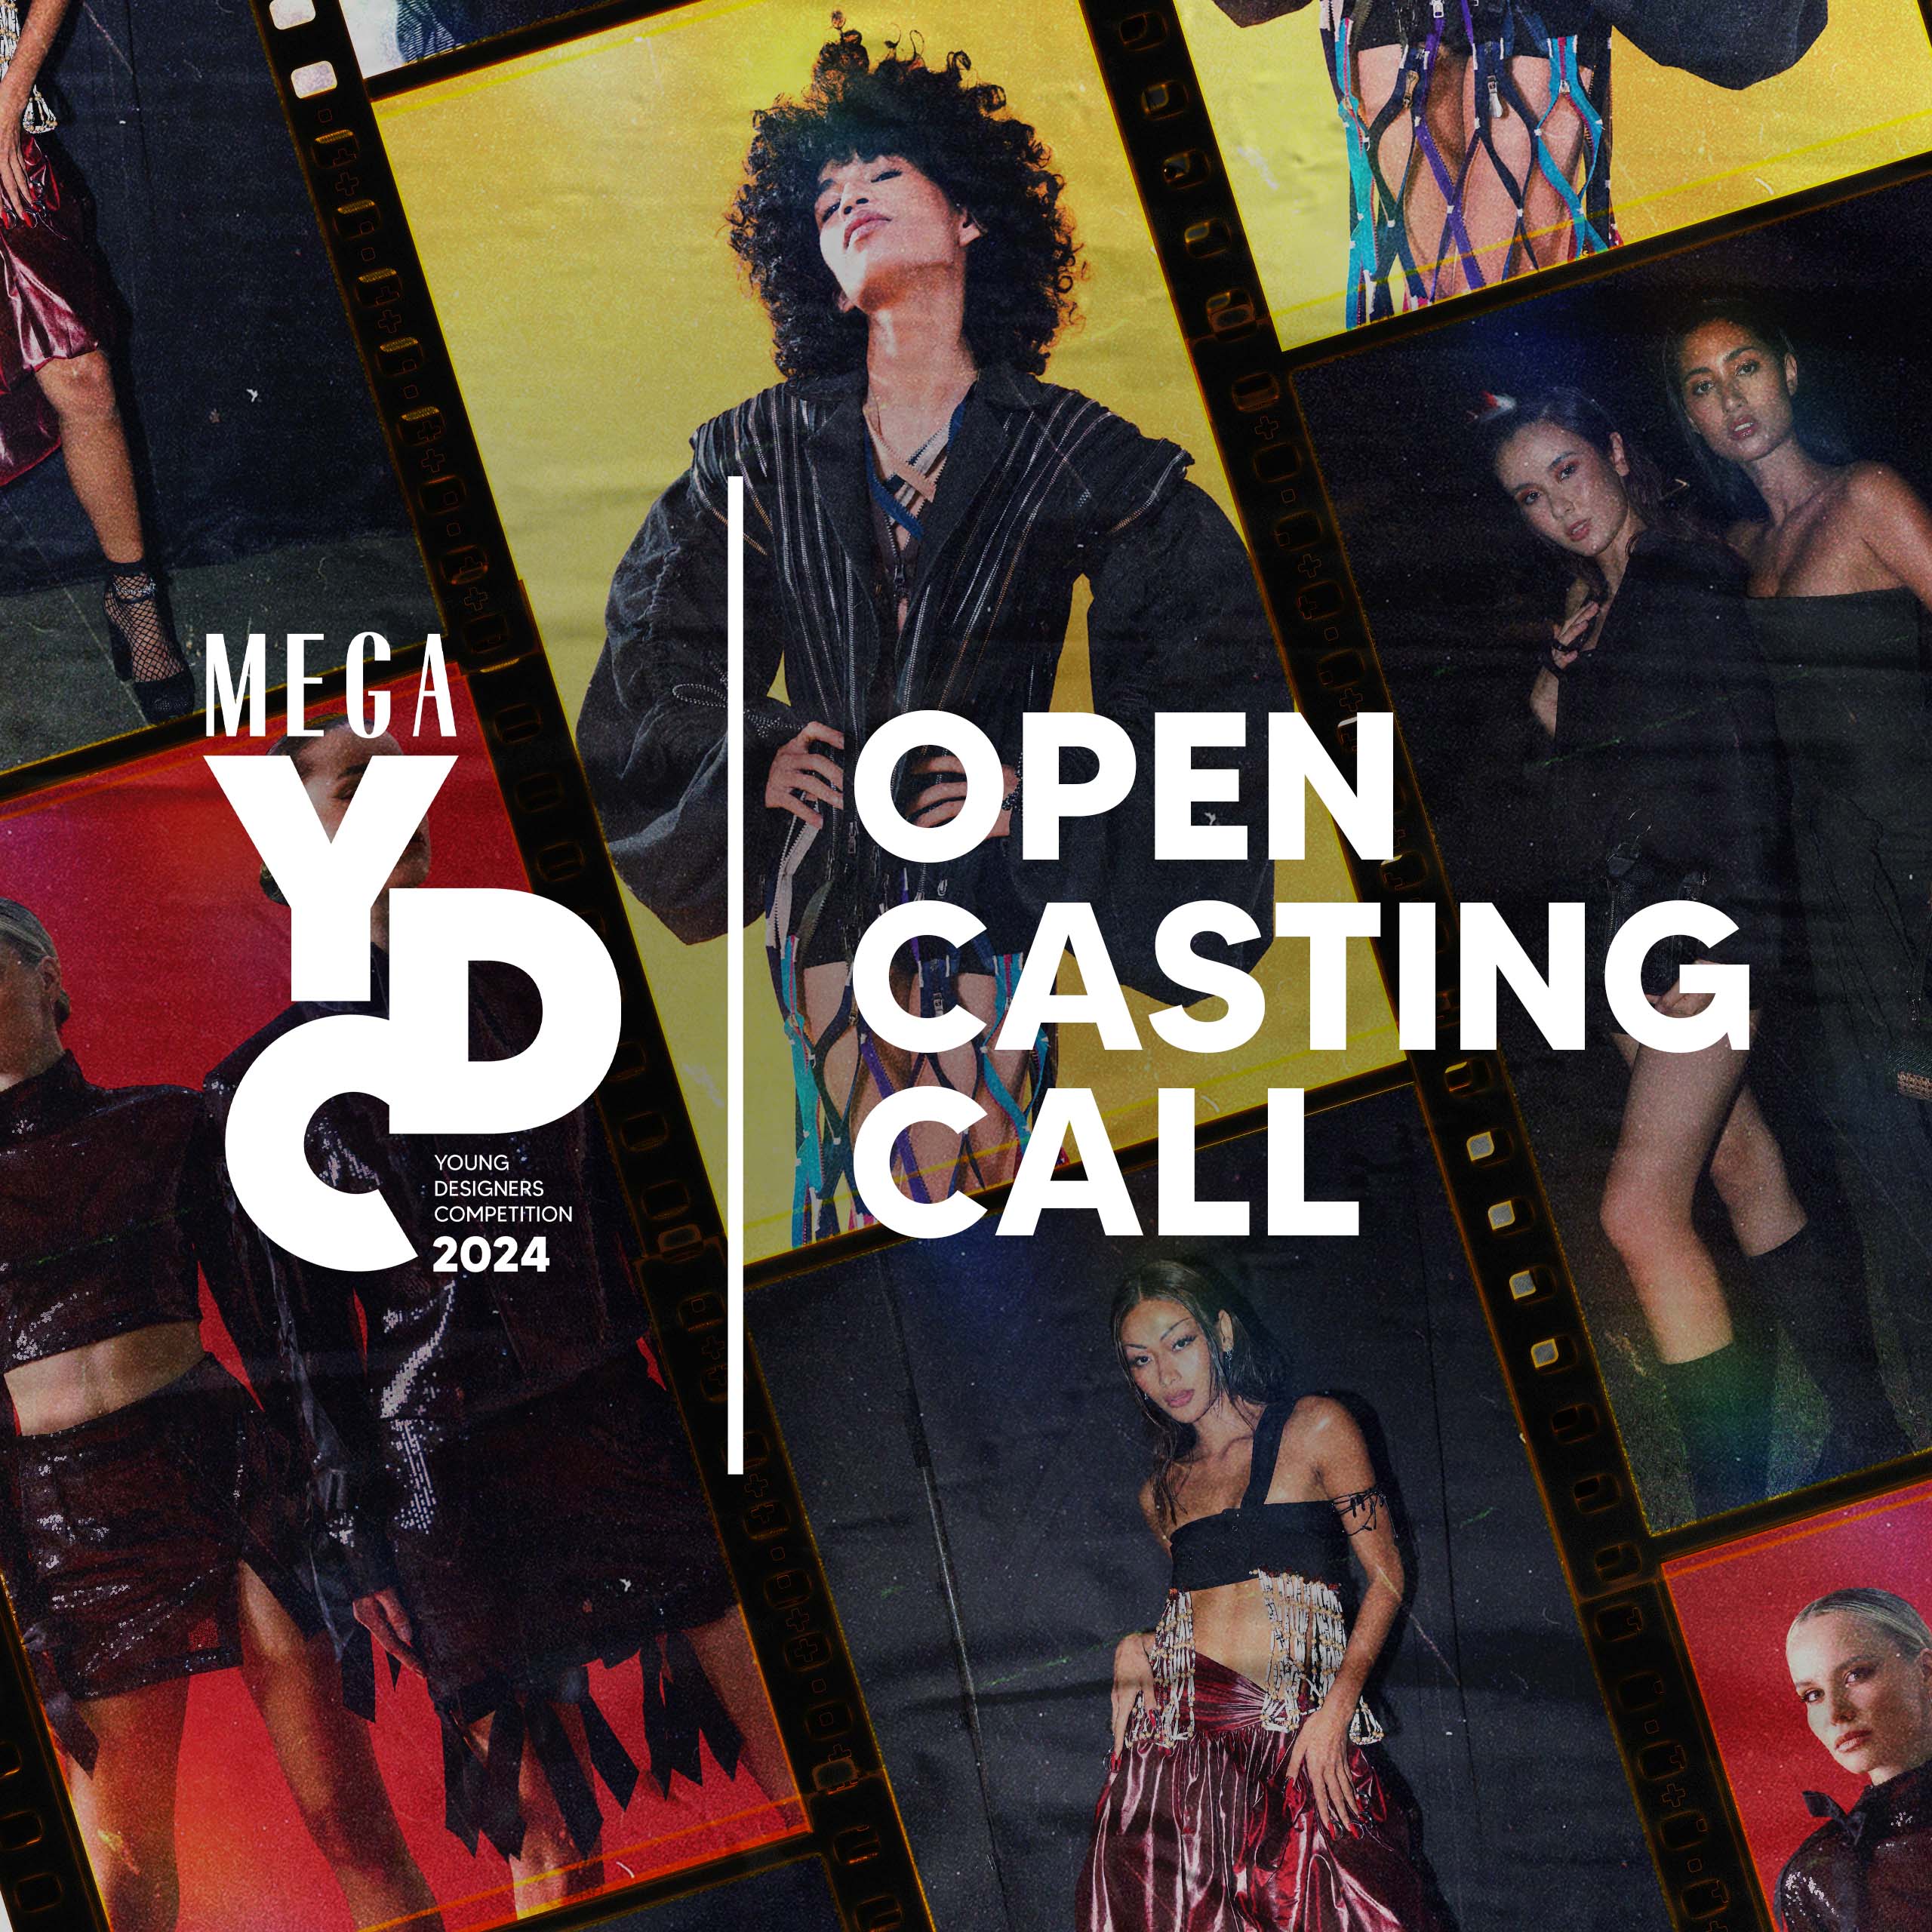 Calling All Models: MEGA Young Designers Competition 2024